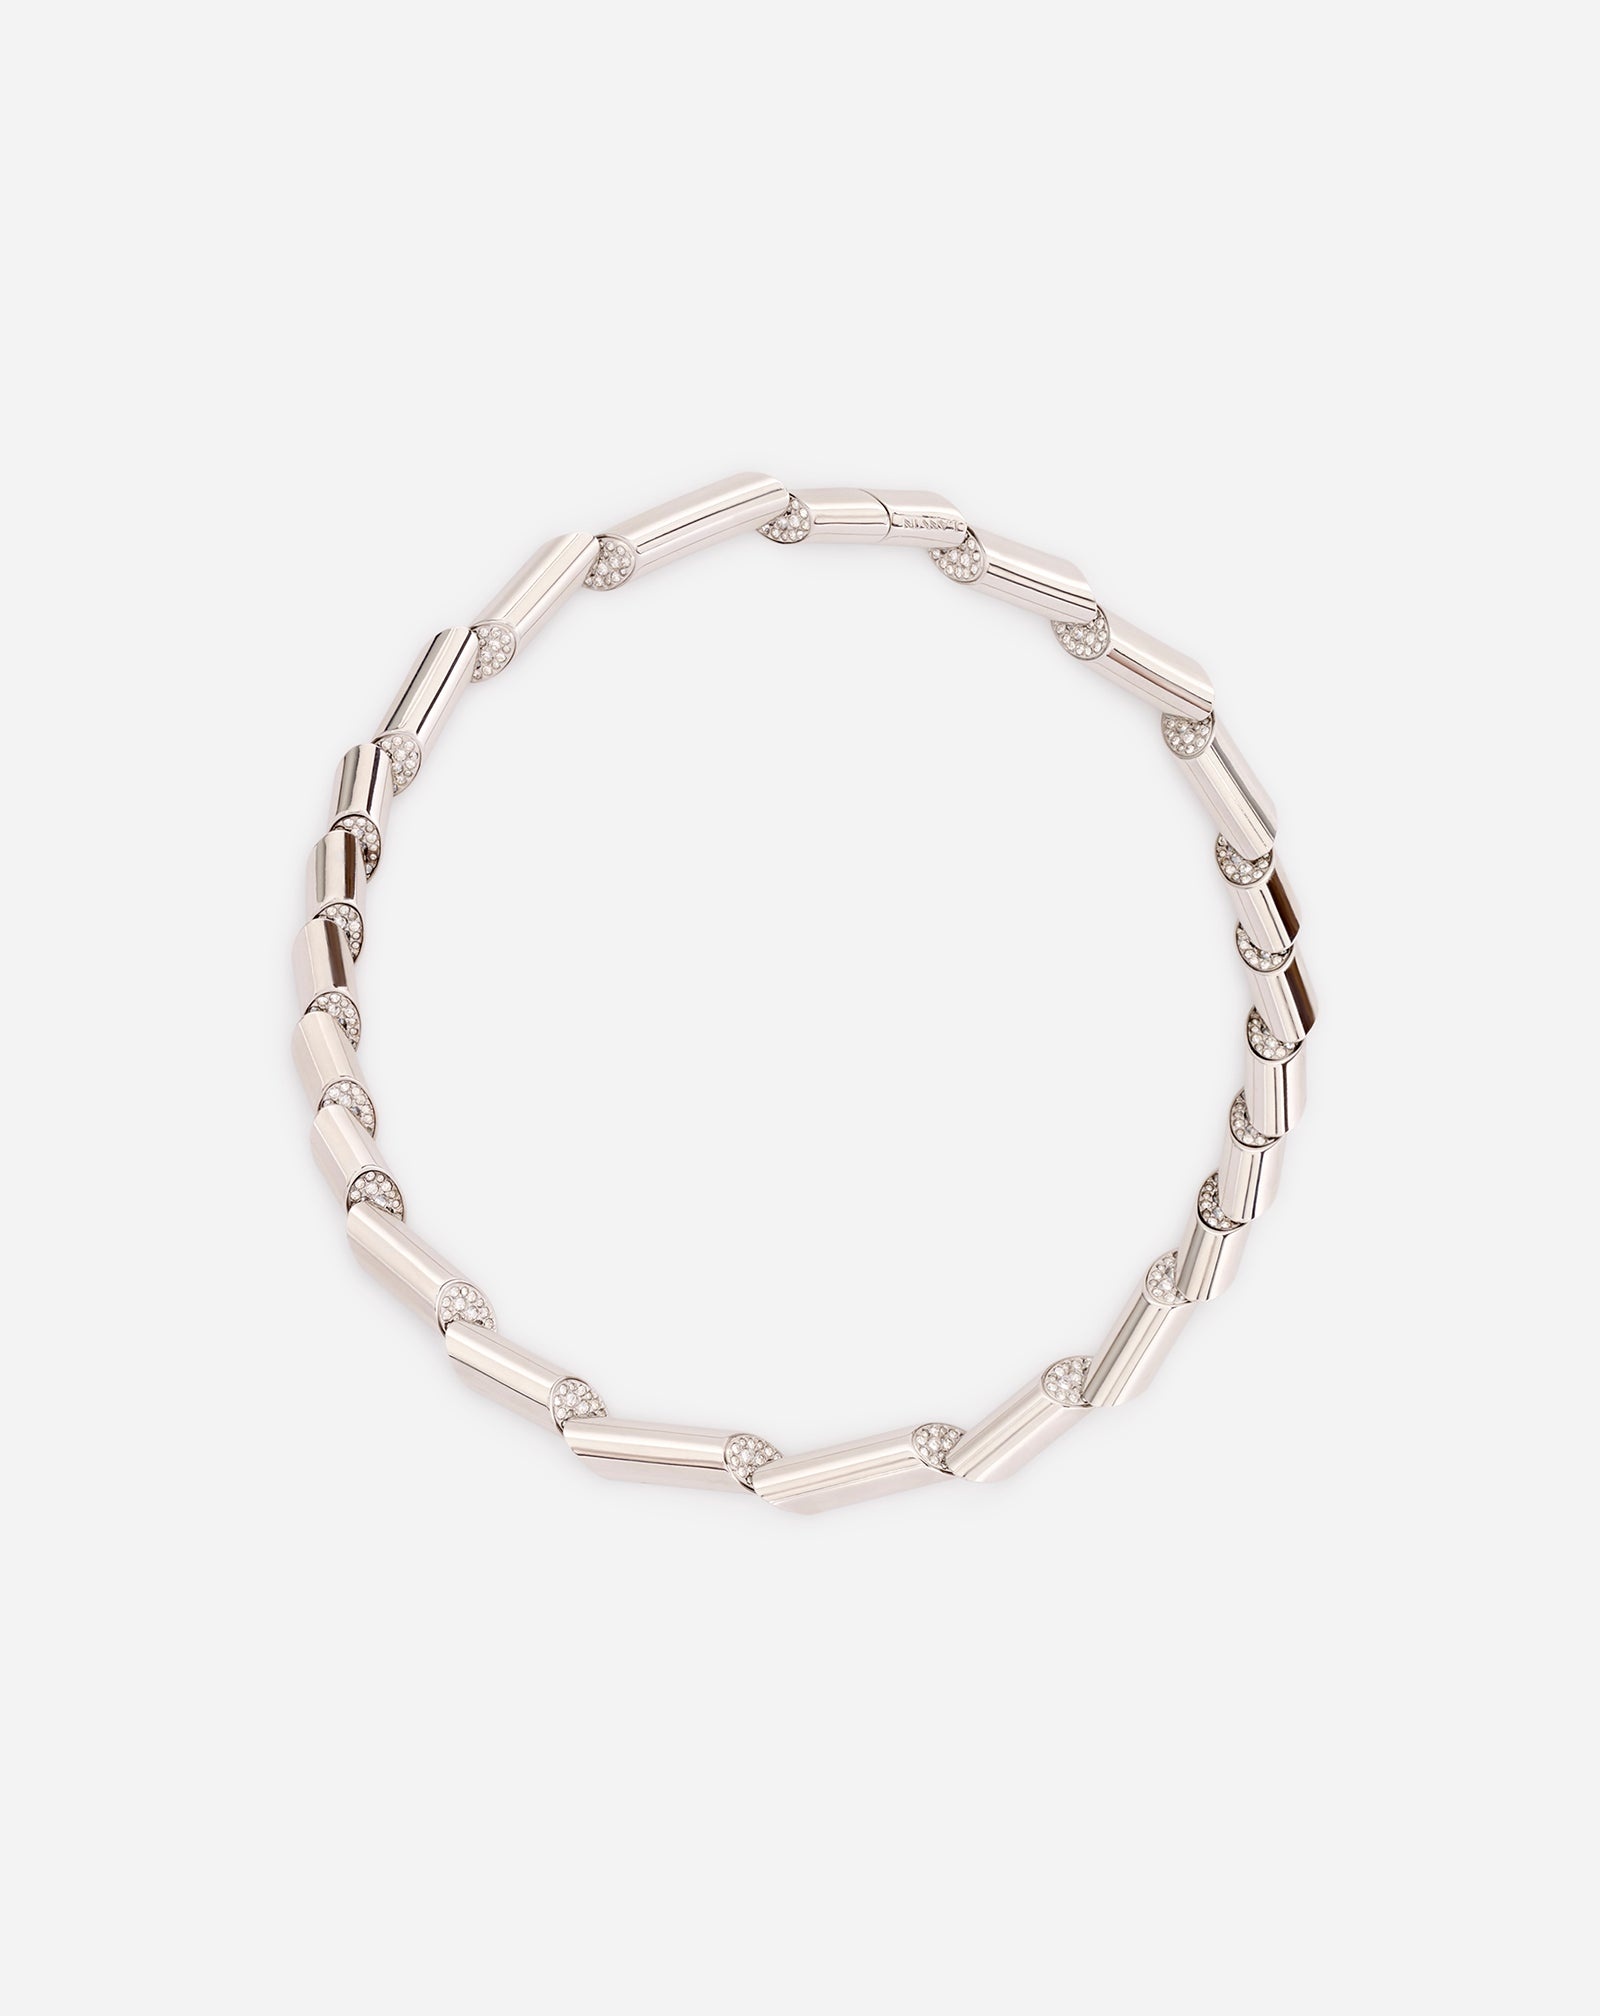 SEQUENCE BY LANVIN RHINESTONE CHOKER NECKLACE - 1